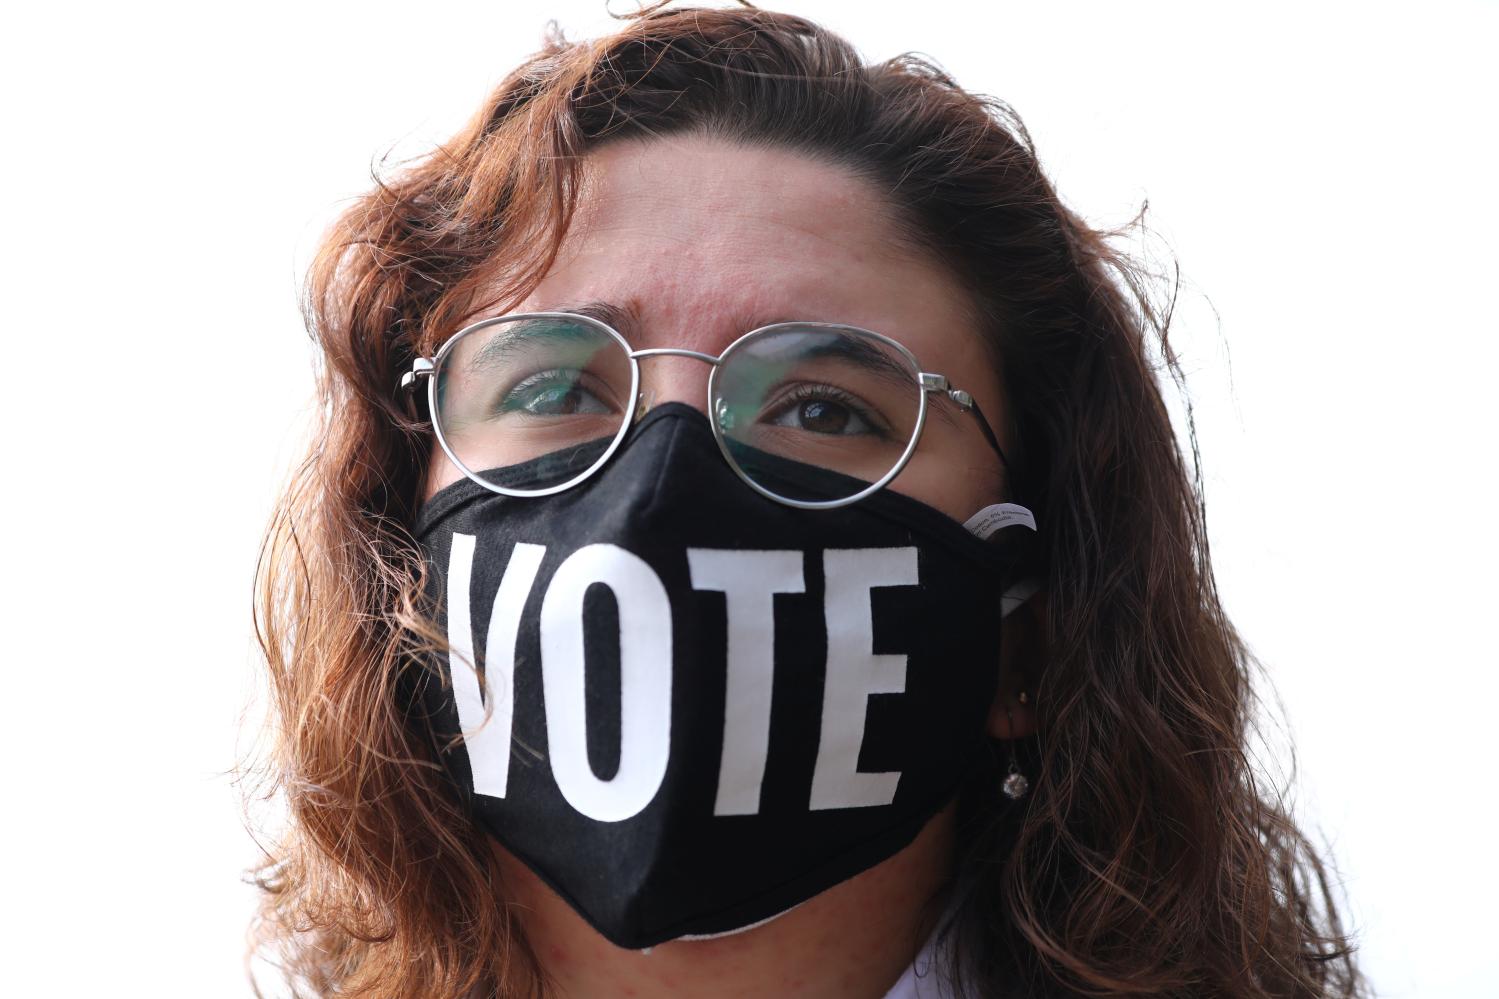 A woman wearing a protective face mask looks on during a Latino voter registration event in Lilburn, Georgia, U.S. December 7, 2020. REUTERS/Dustin Chambers